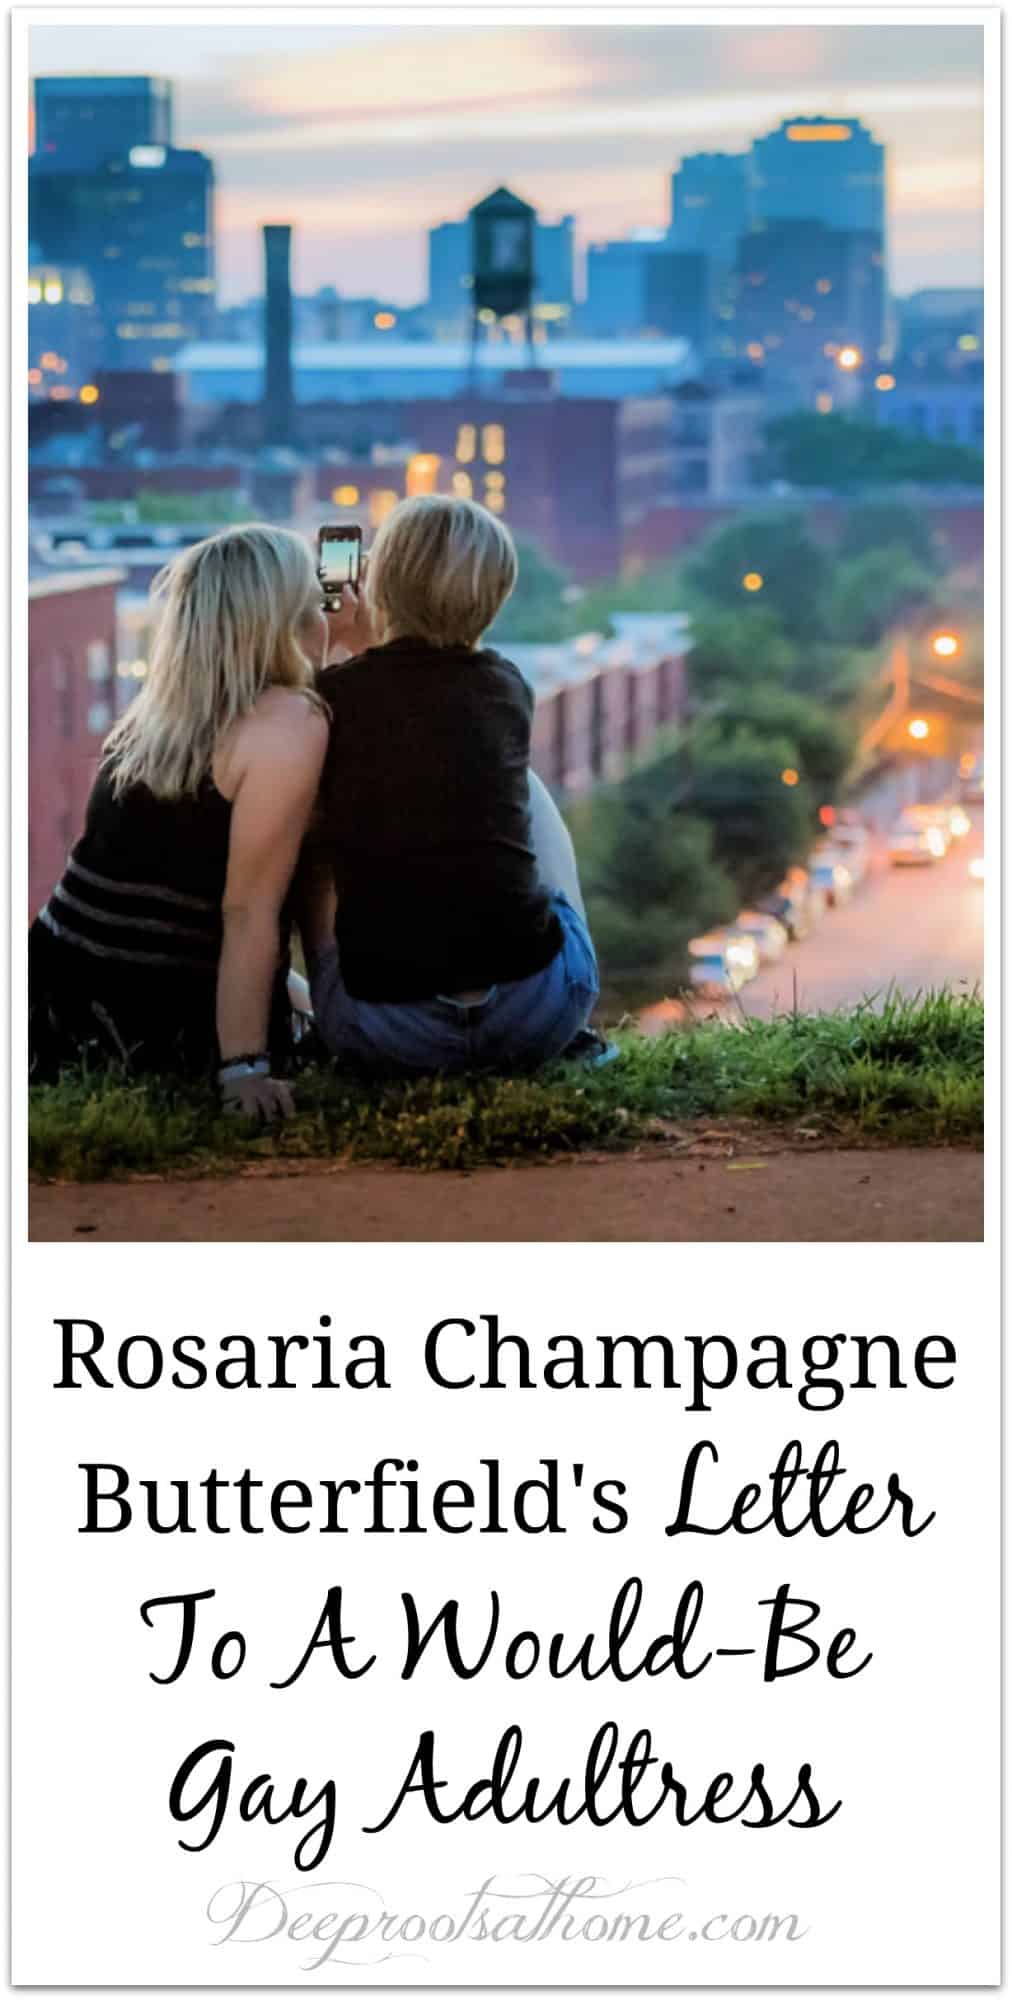 Rosaria Champagne Butterfield's Letter To A Potential Gay Adultress, 2 women looking over a city at sundown